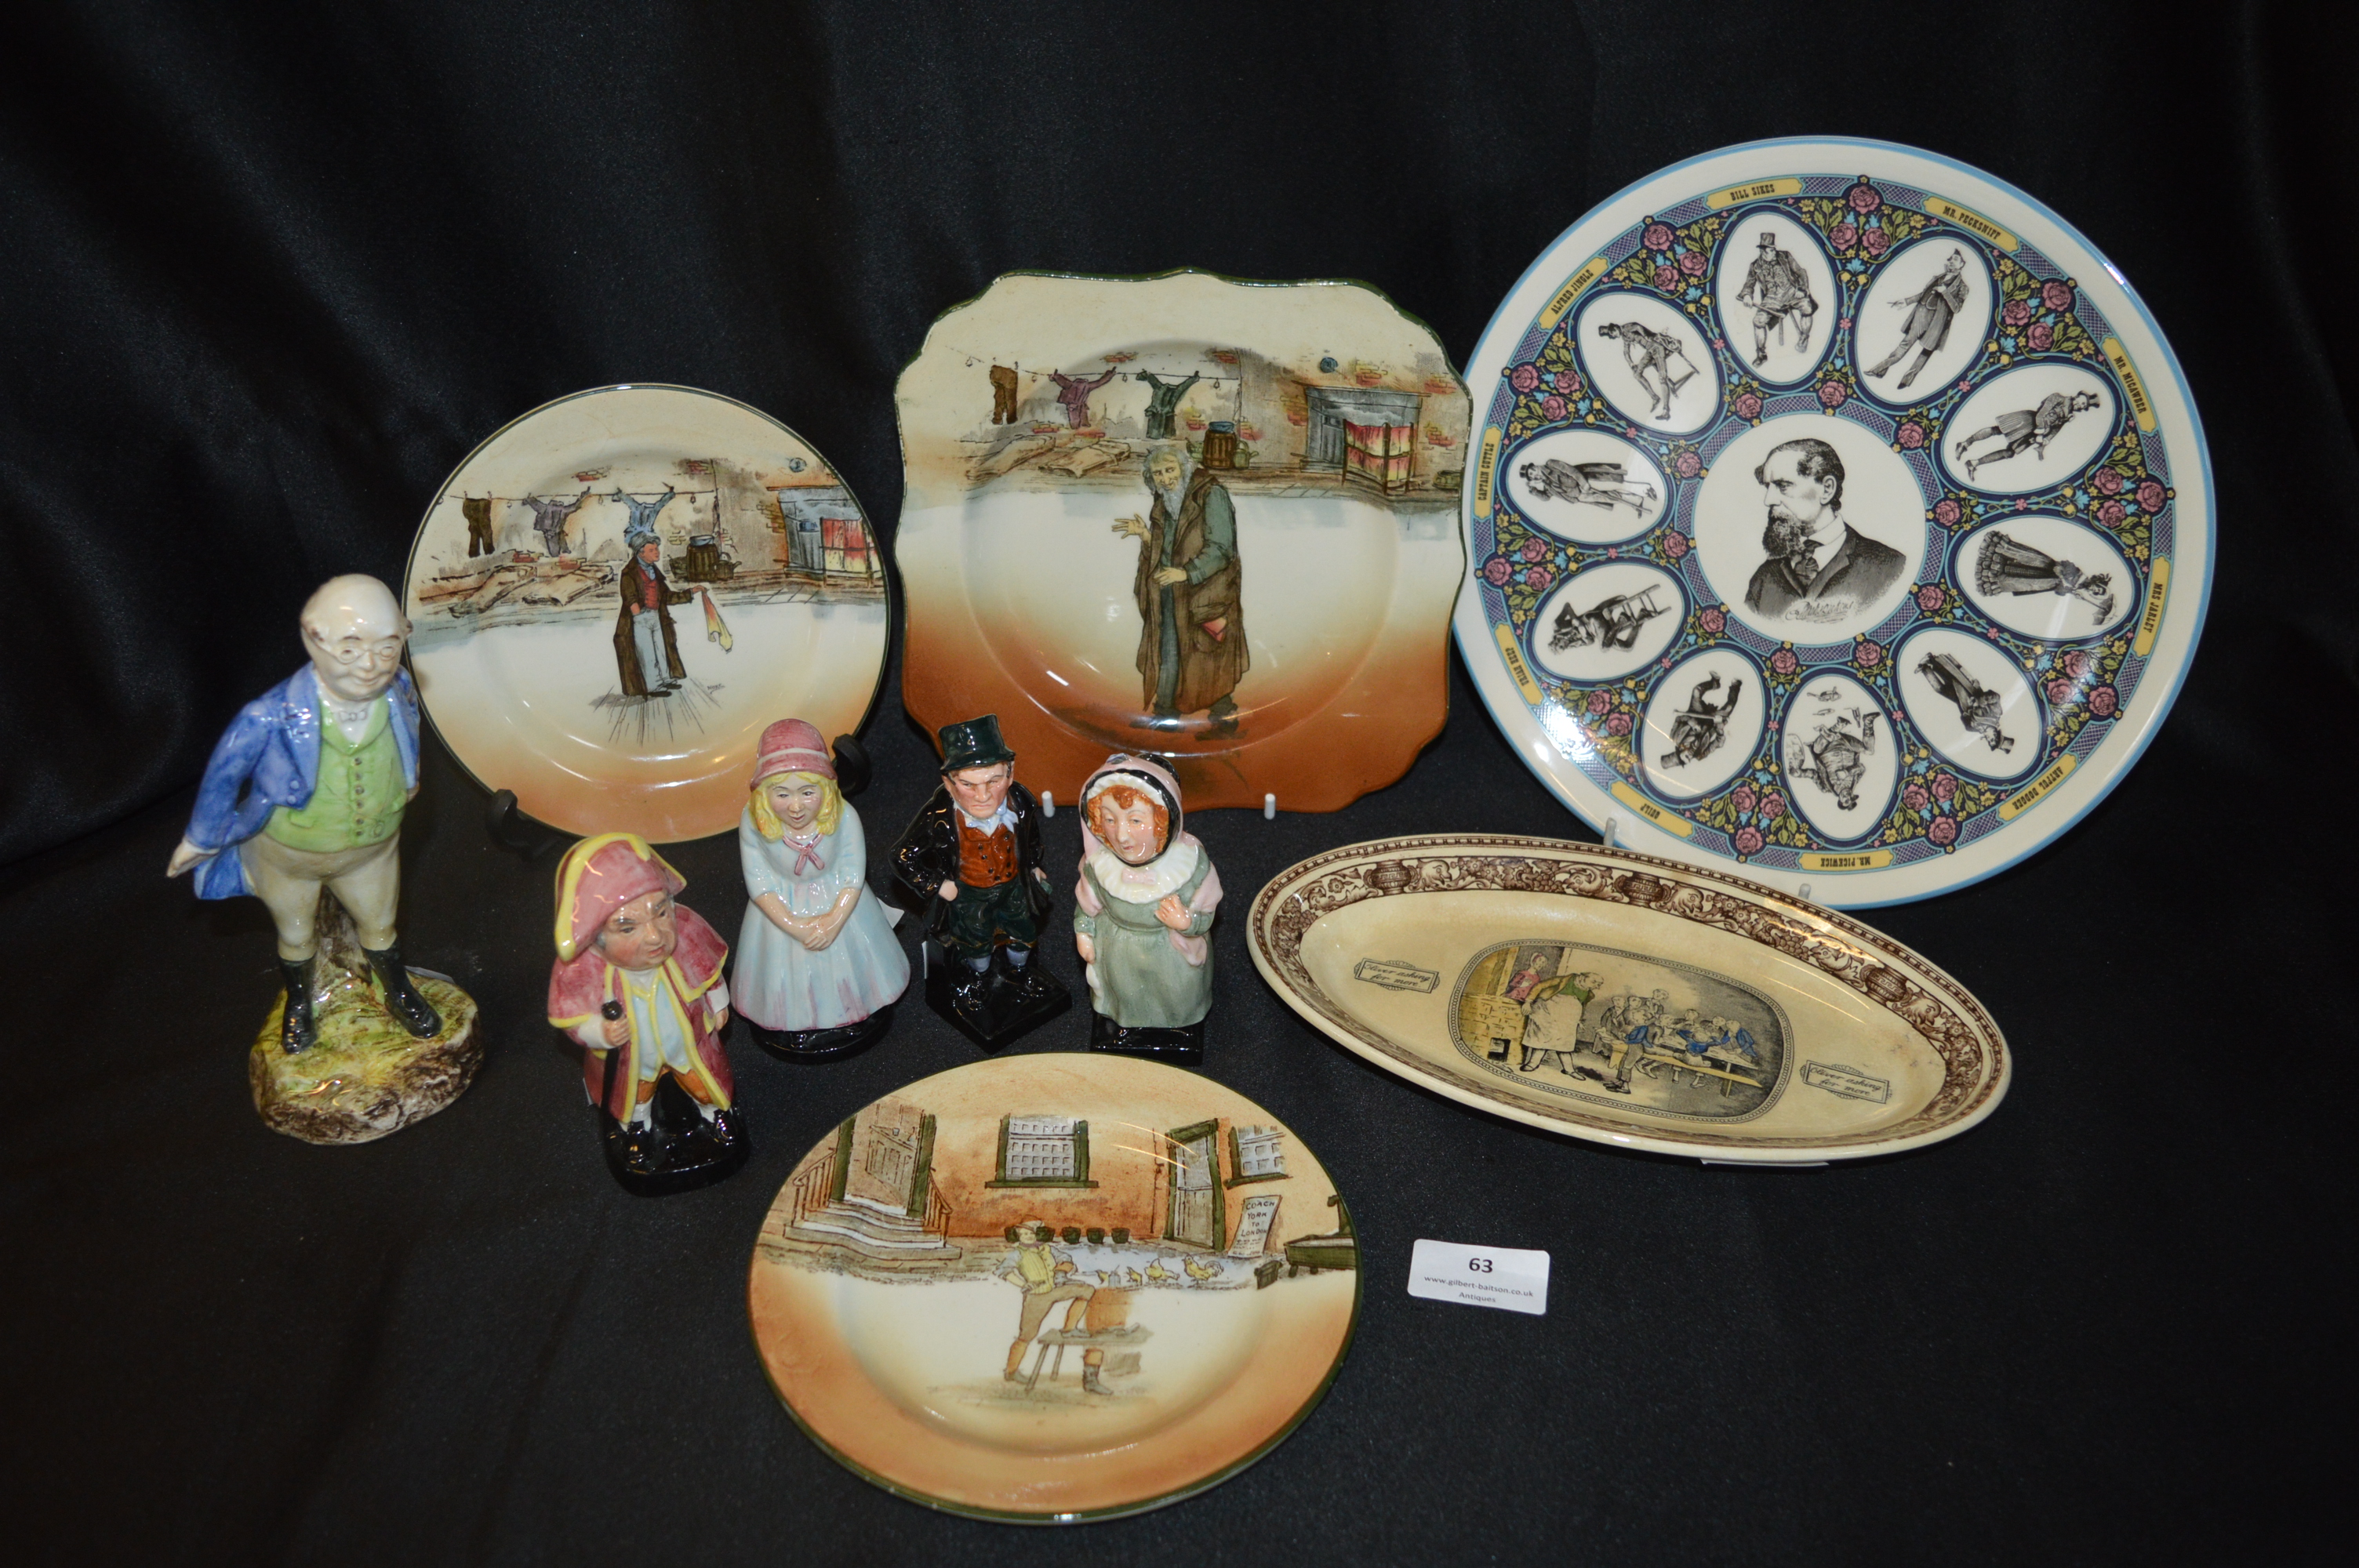 Doulton & Adams Dickens Plates and Figures